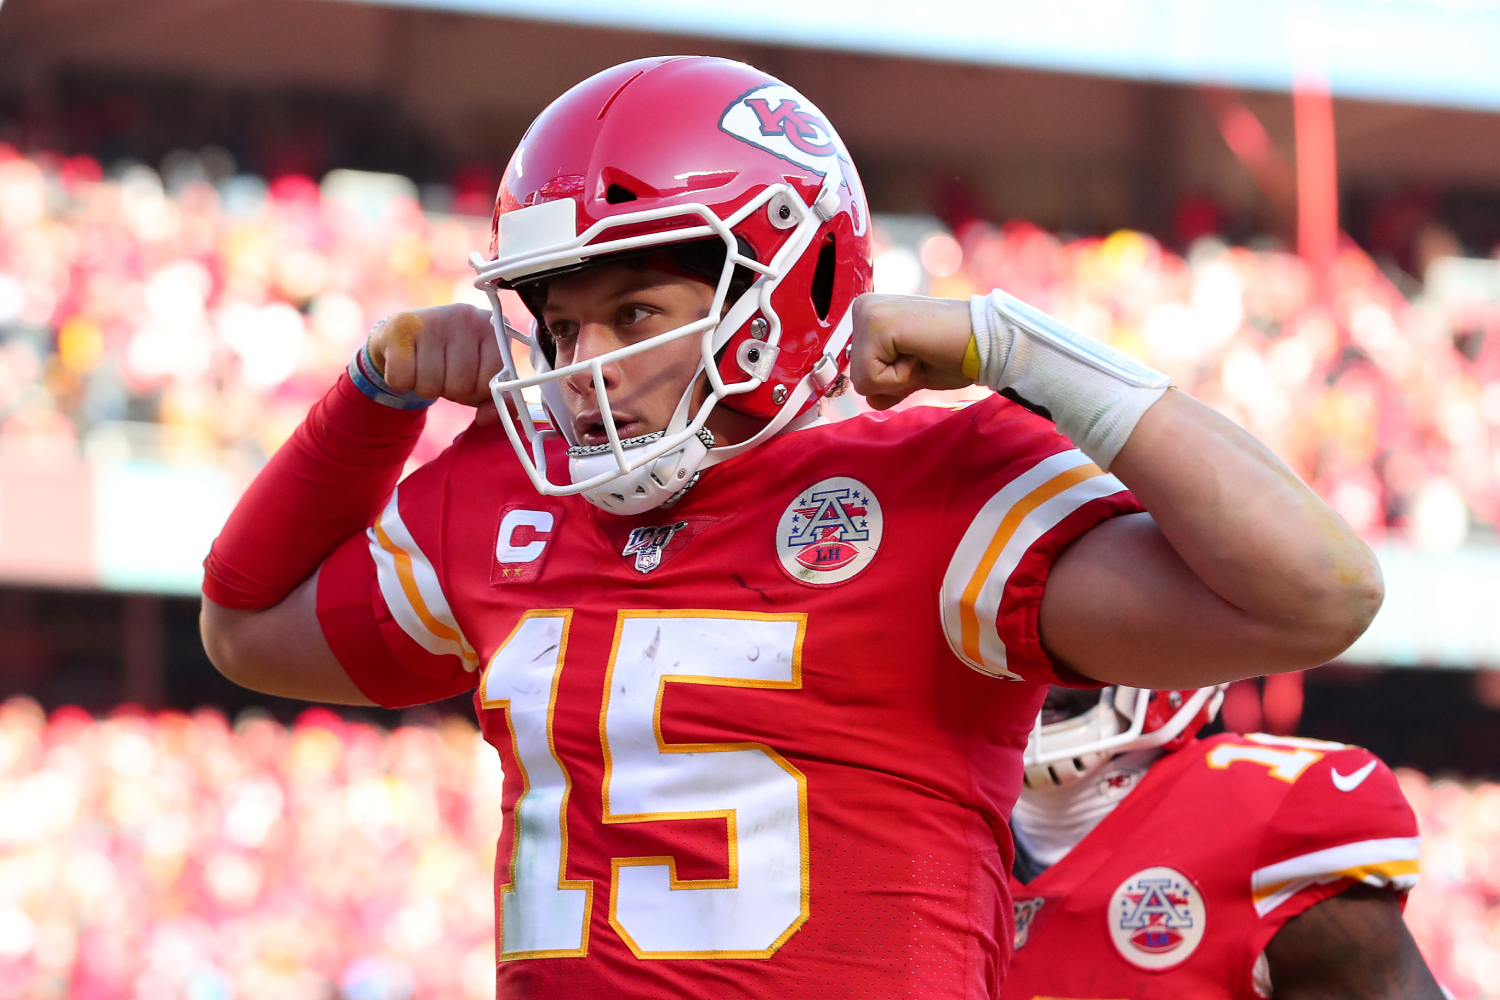 Is Patrick Mahomes' father the retired MLB player? - DraftKings